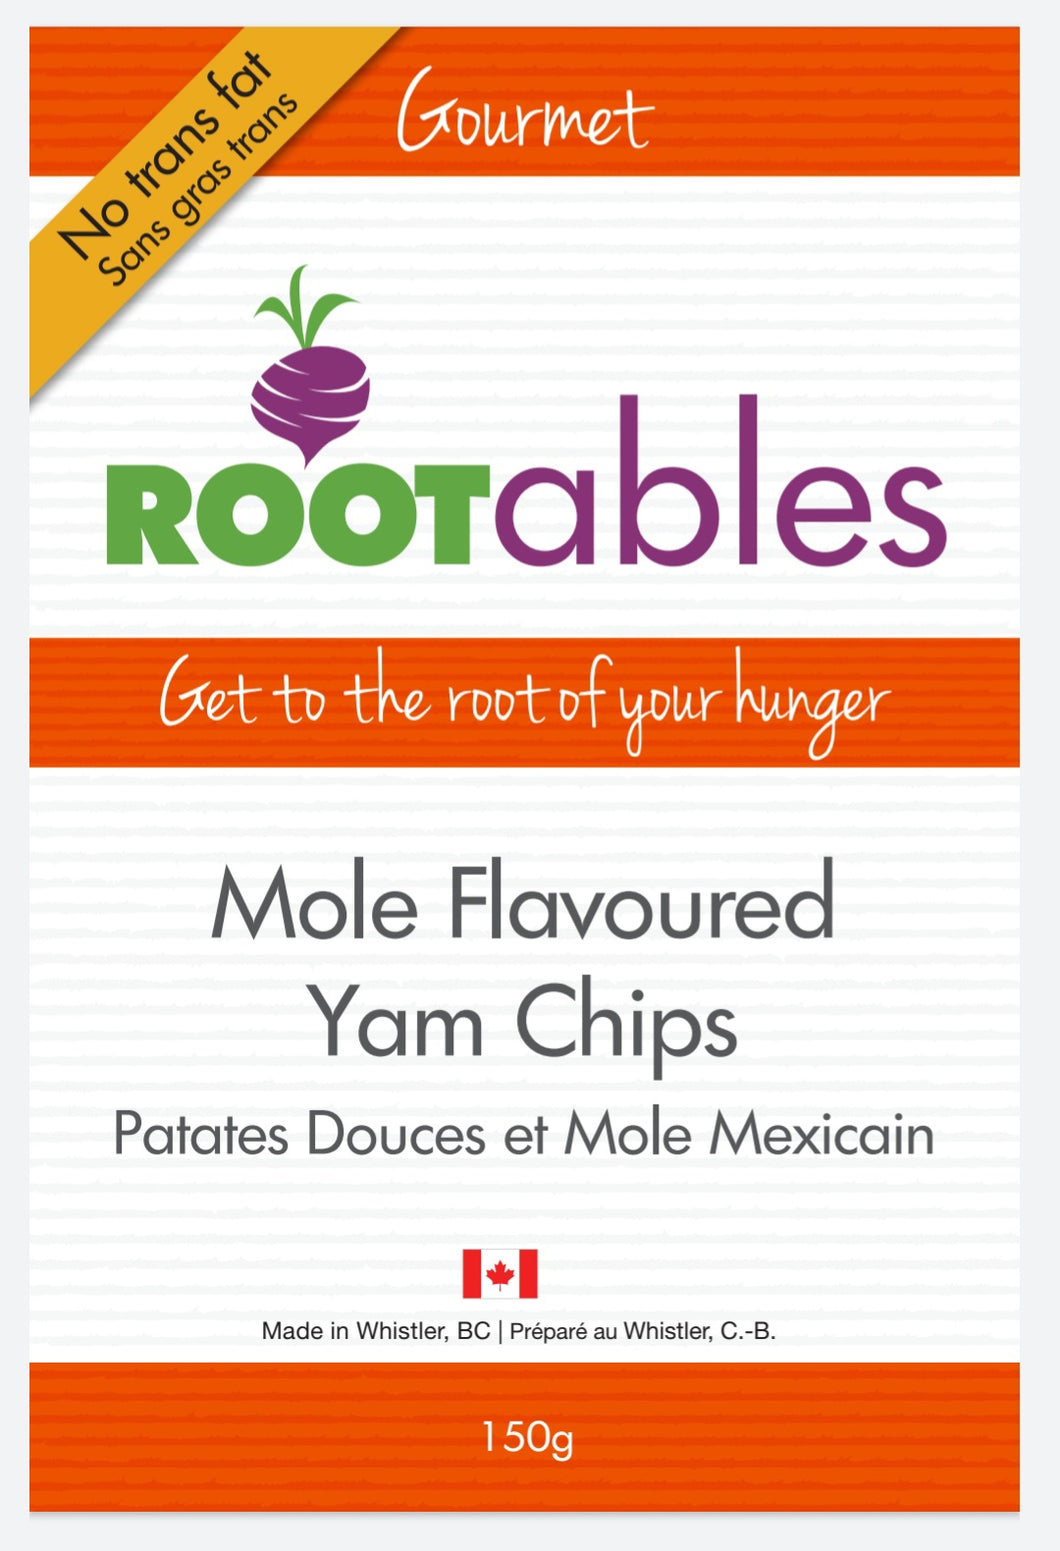 Mole Flavored Yam Chips